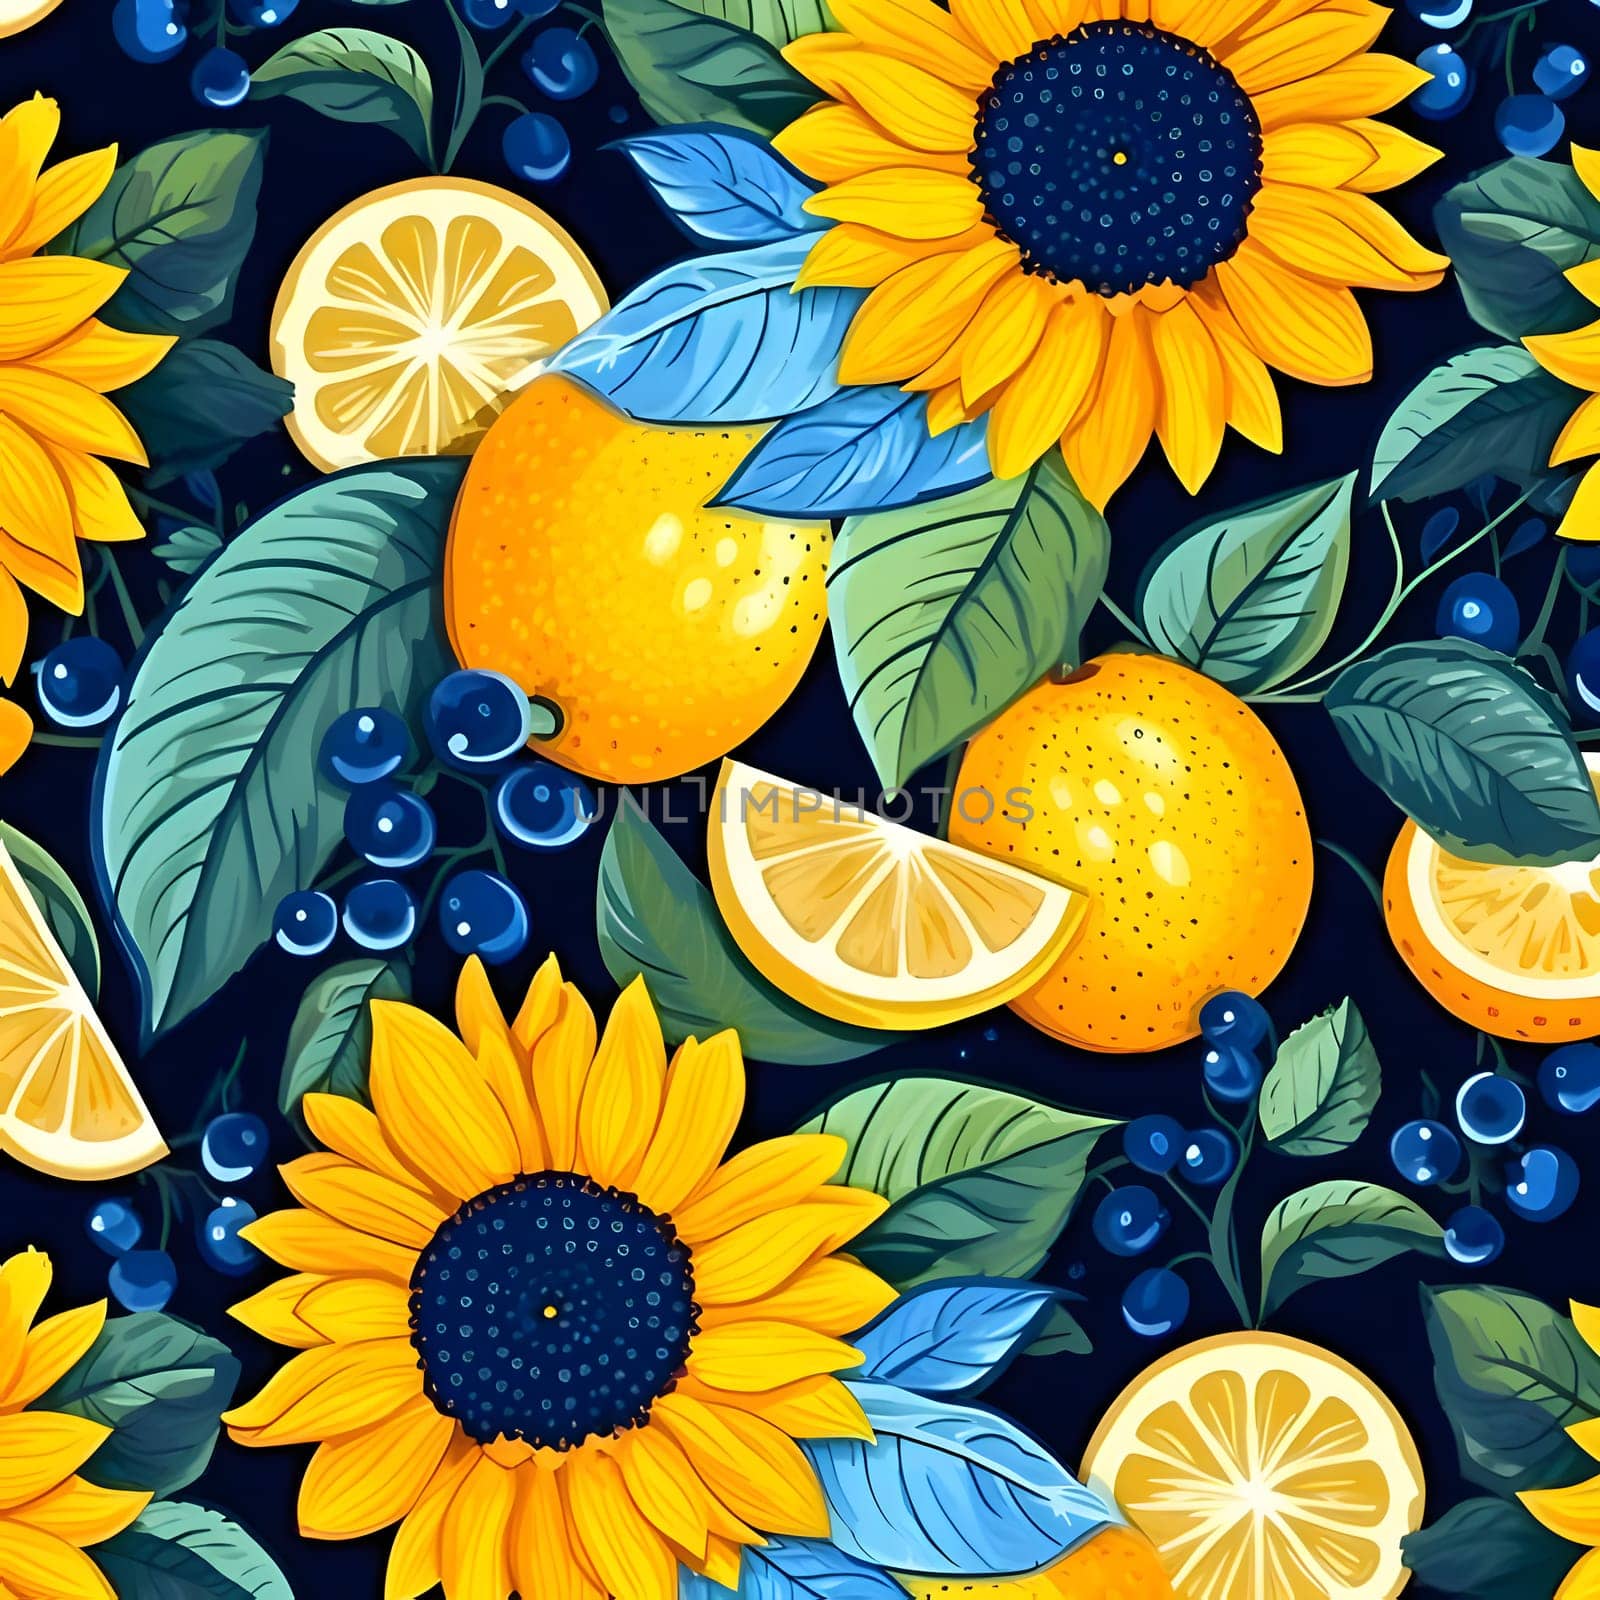 Patterns and banners backgrounds: Seamless pattern with sunflowers, lemons and berries.